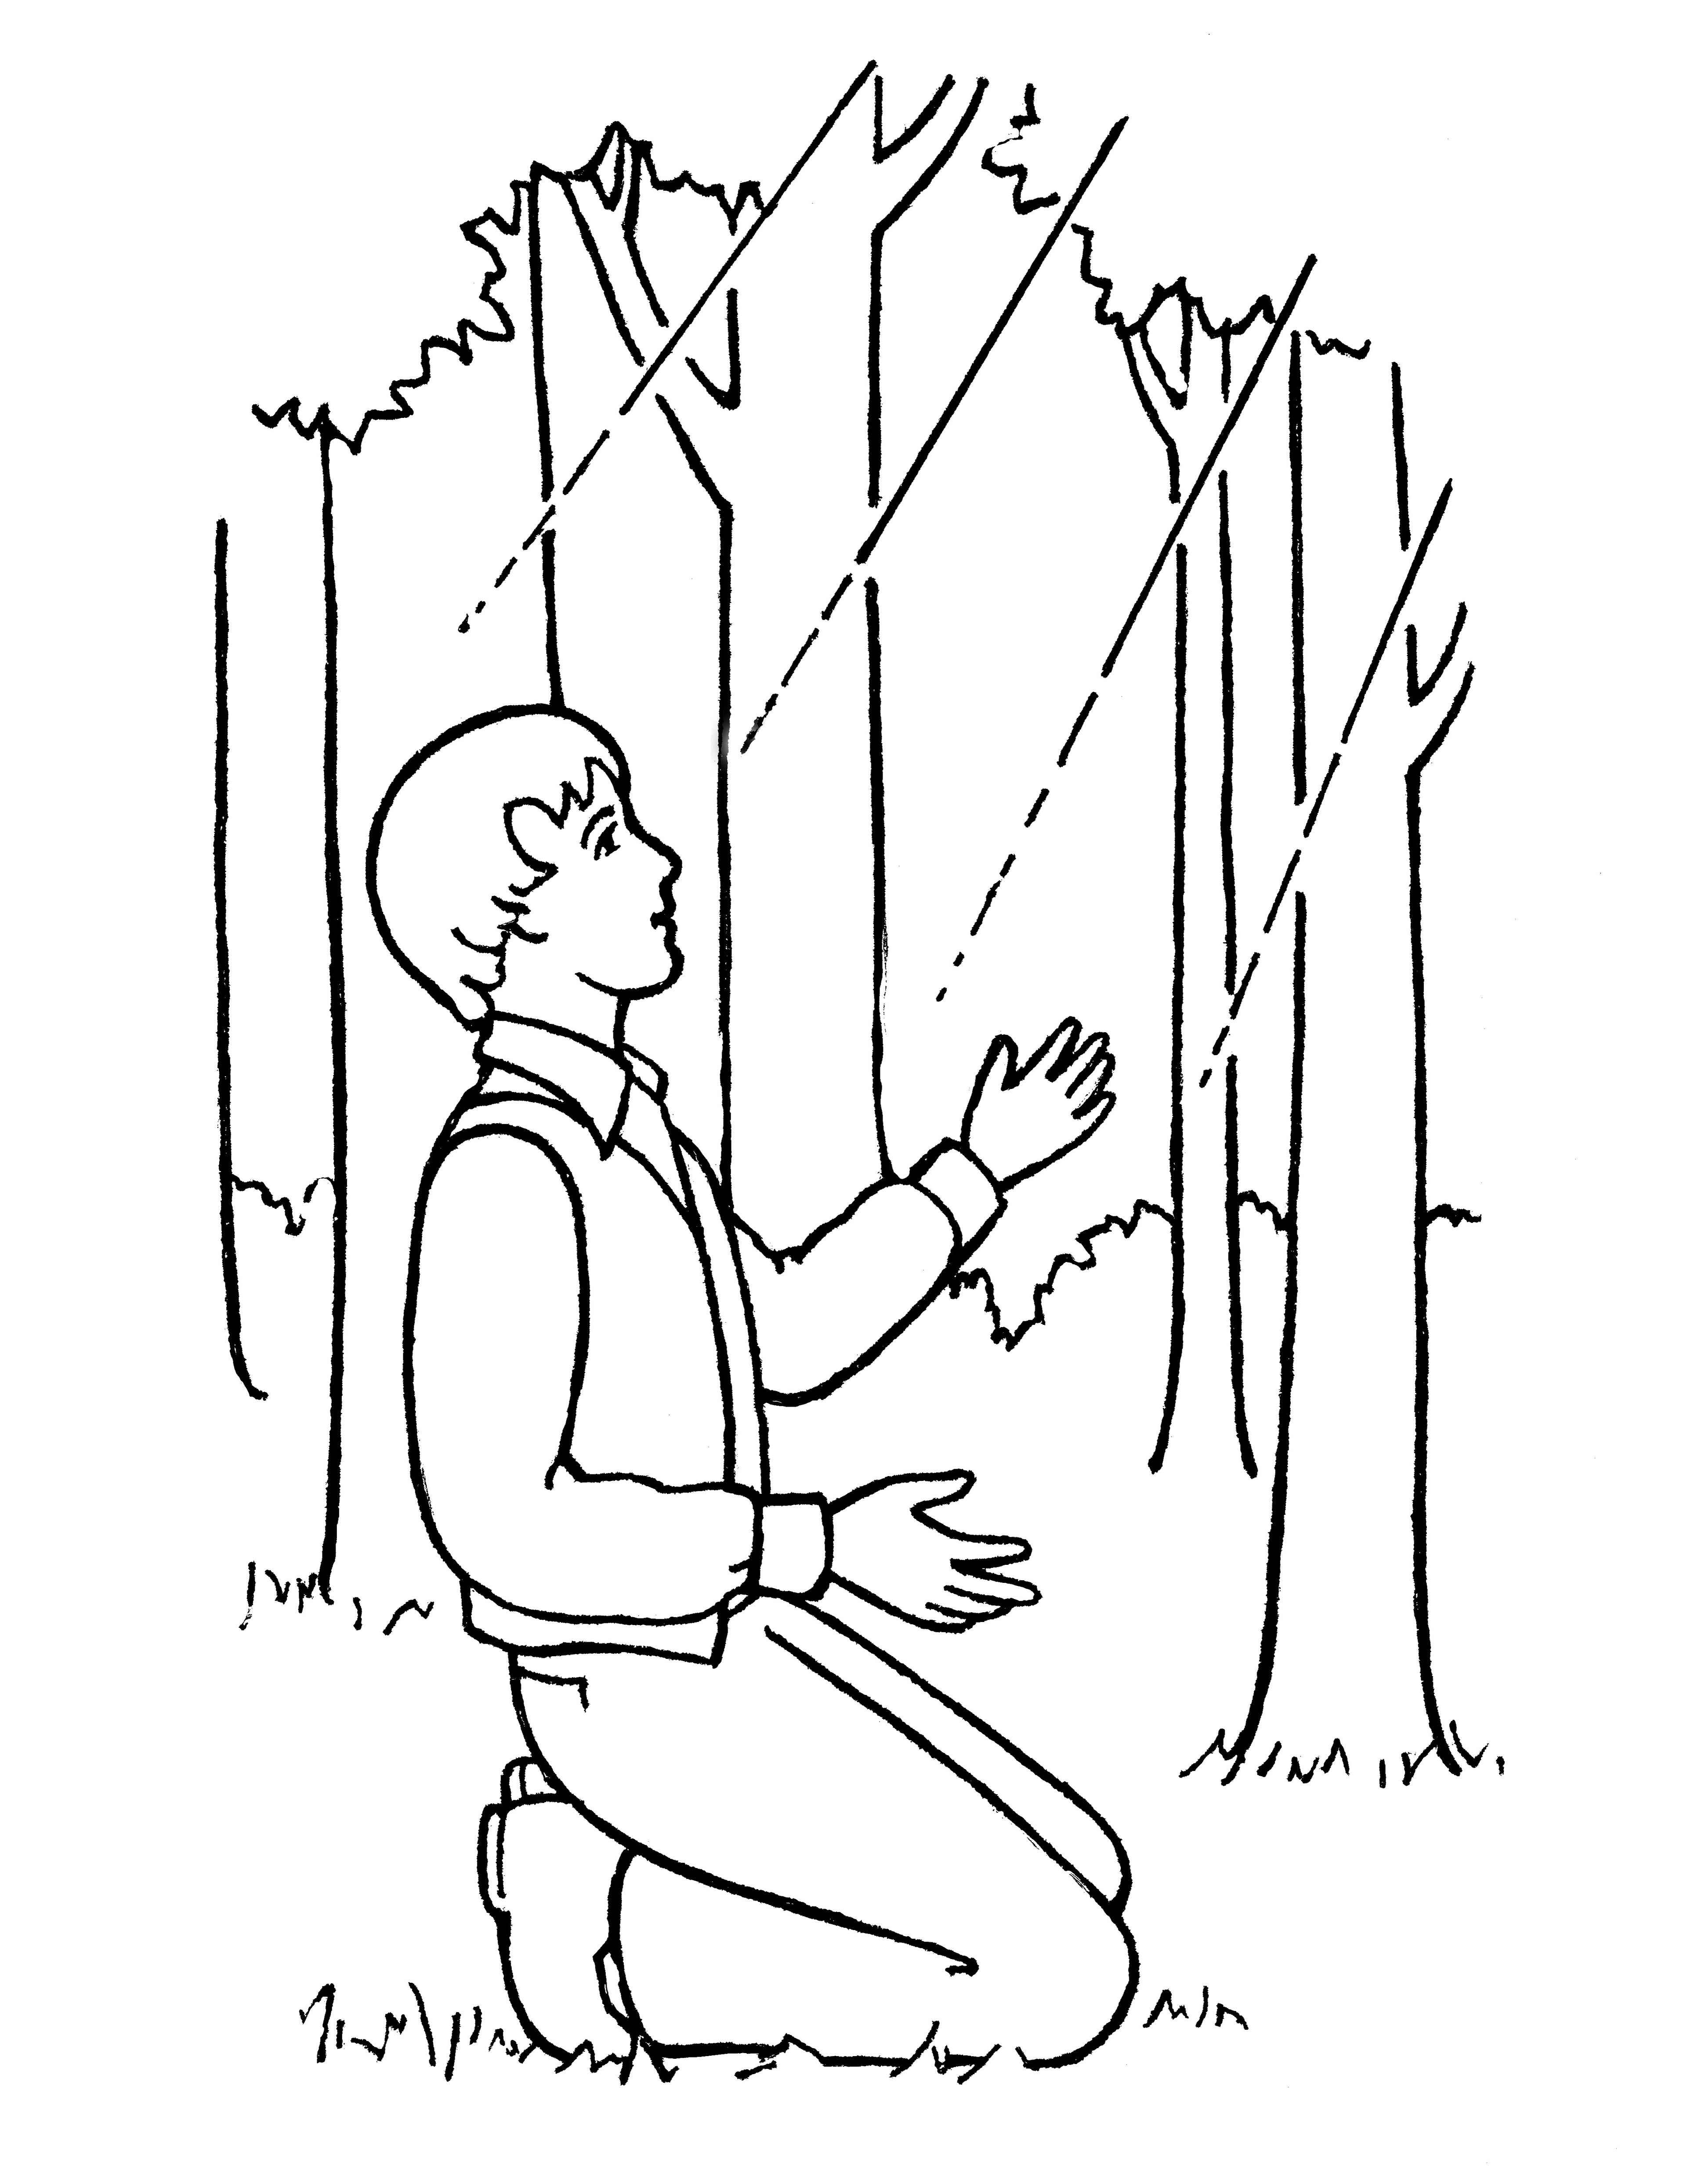 An illustration of Joseph Smith seeing a light overhead, from the nursery manual Behold Your Little Ones (2008), page 91.